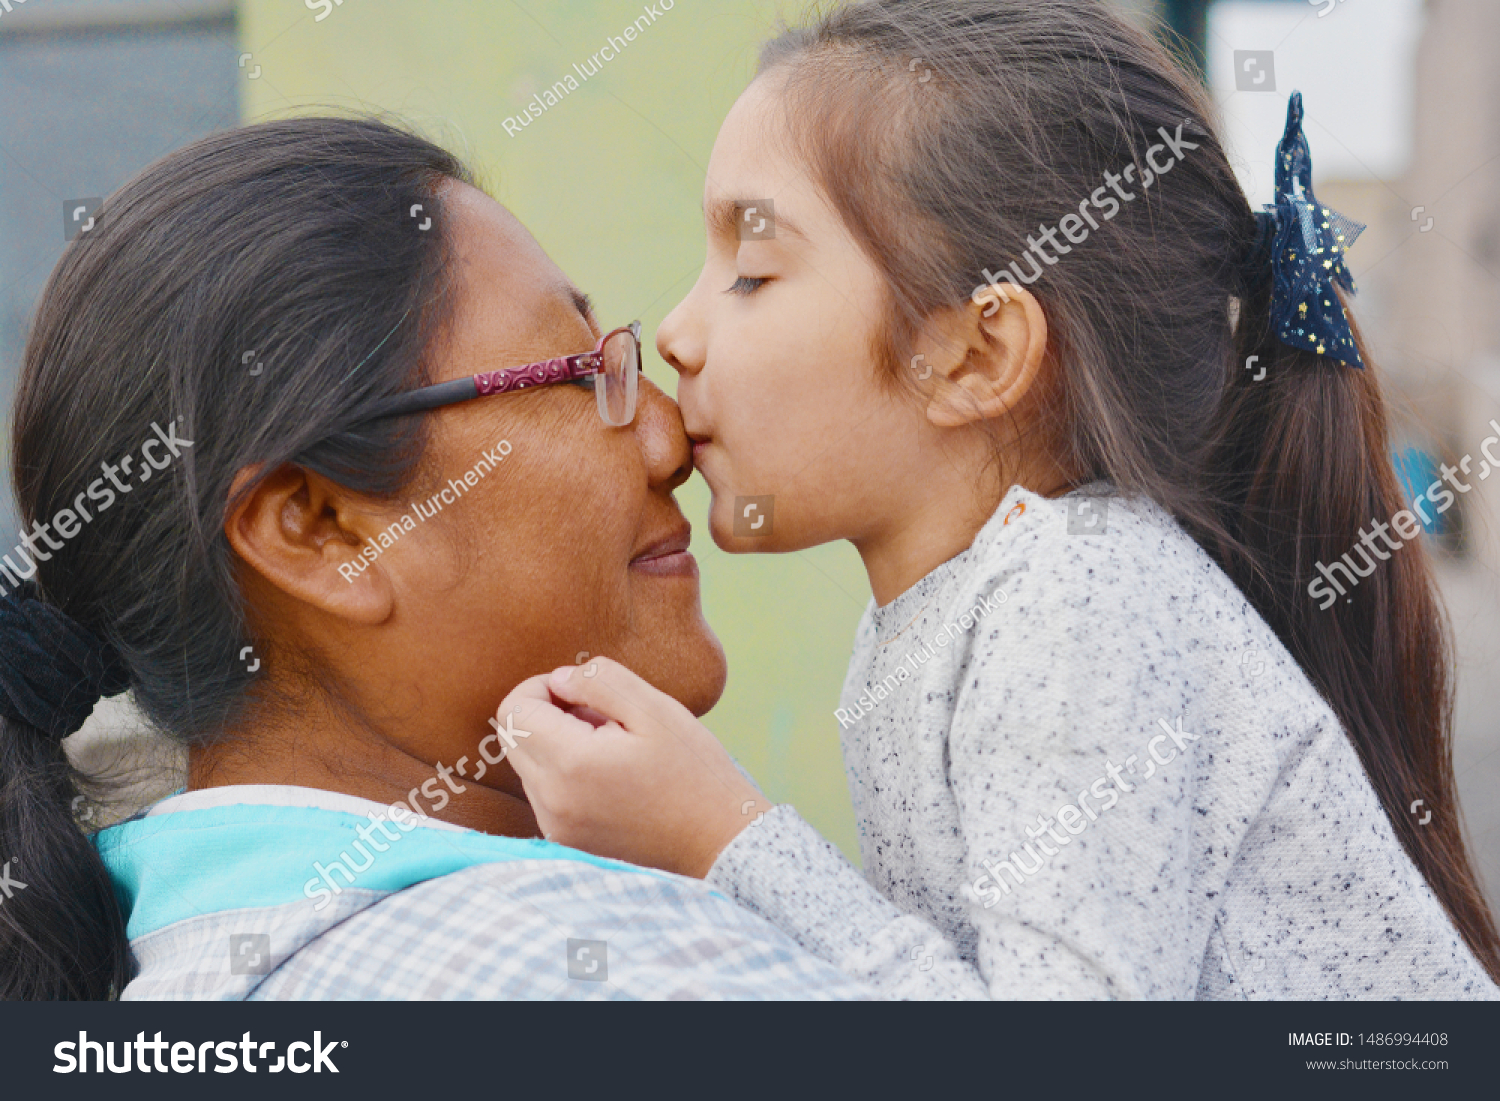 Tender portrait of native american woman with her little daughter. #1486994408